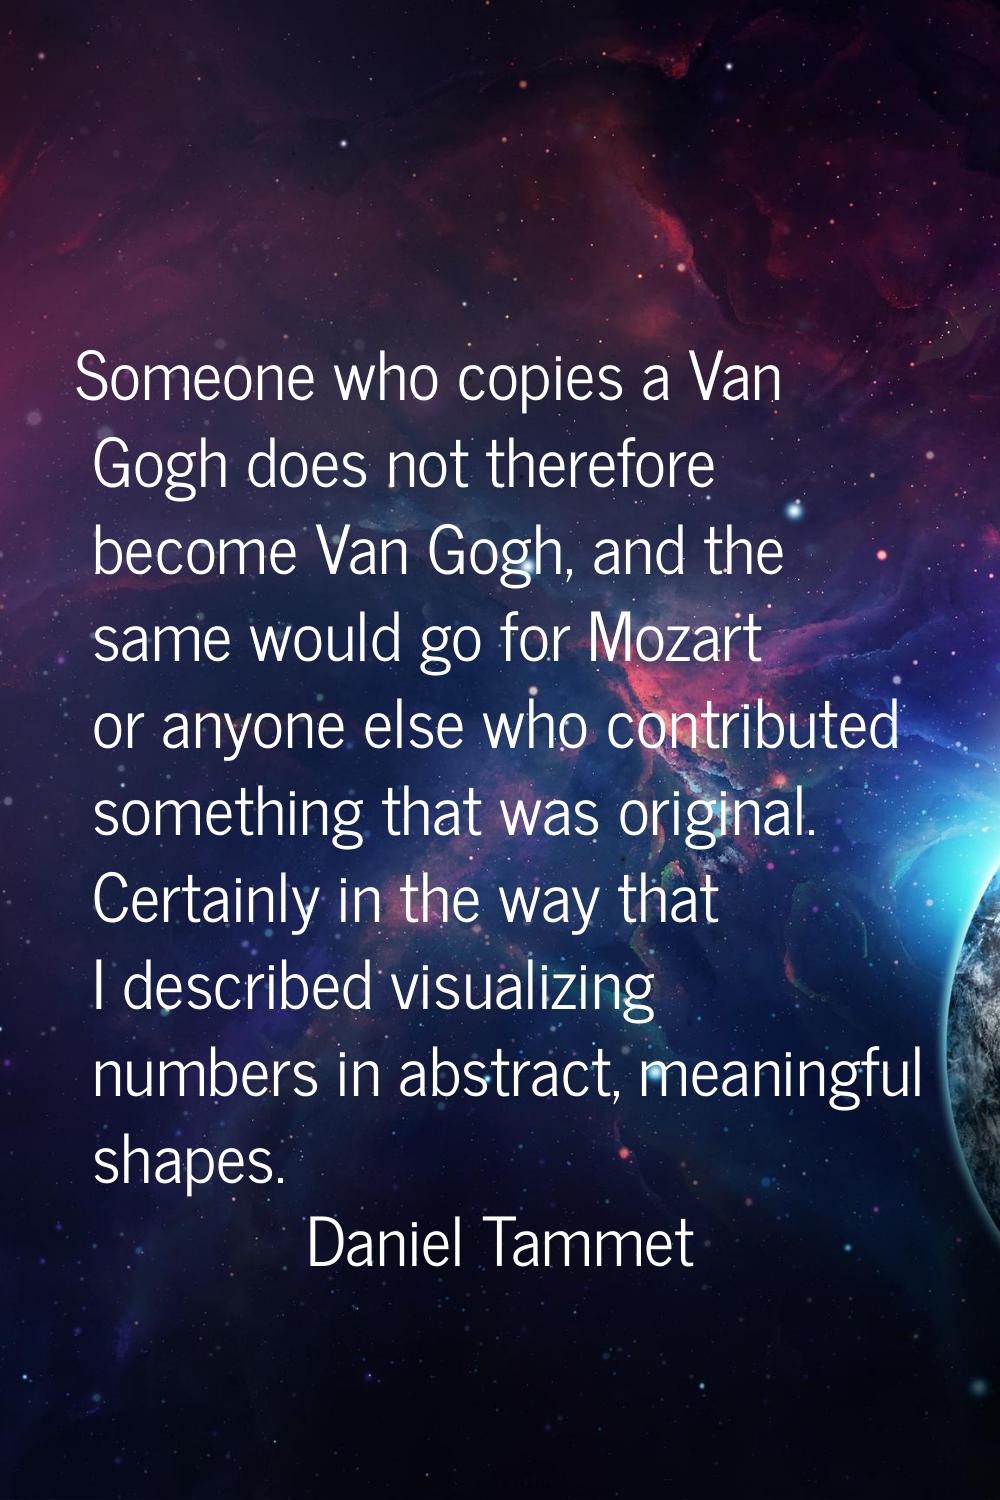 Someone who copies a Van Gogh does not therefore become Van Gogh, and the same would go for Mozart 